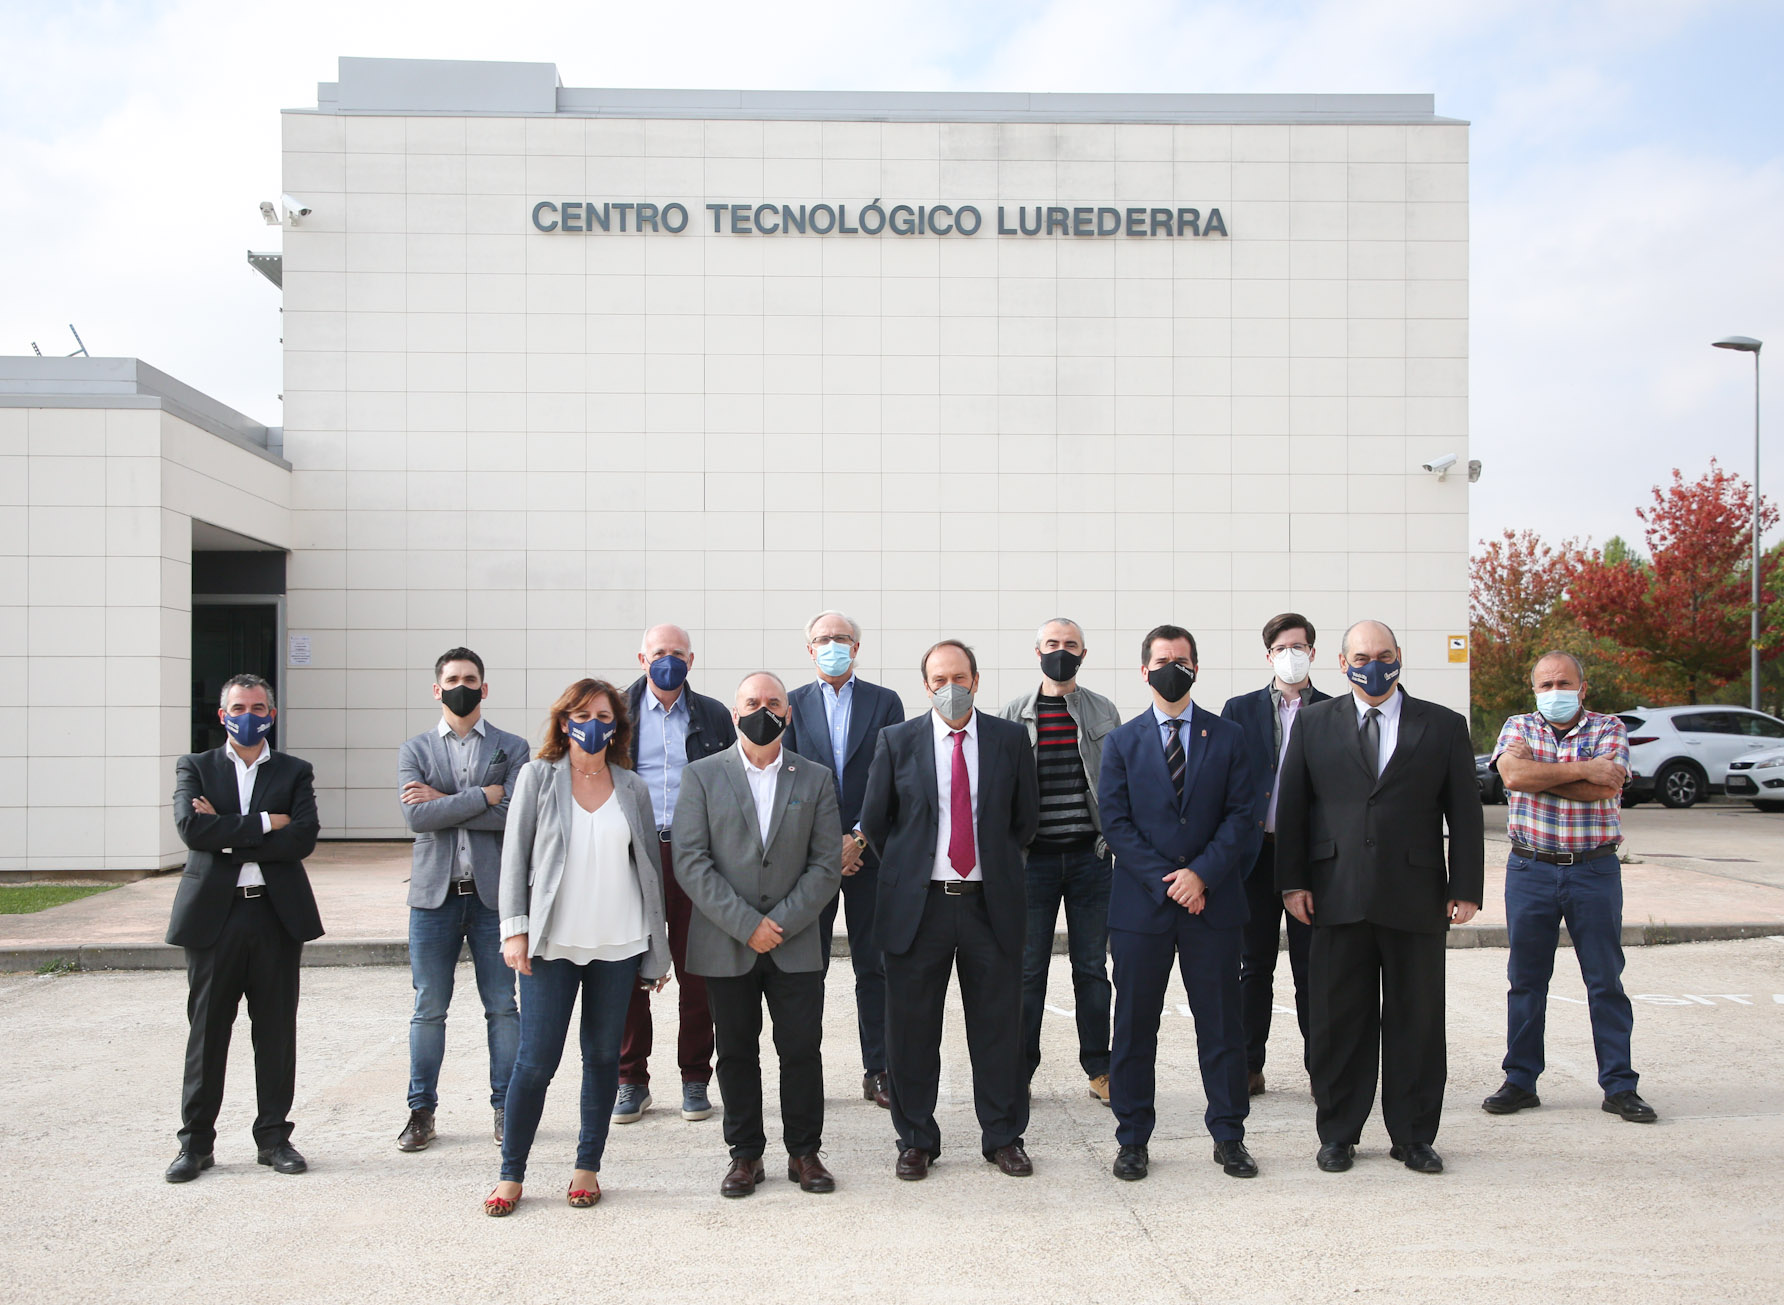 The Lurederra Technological Center receives important visits from the Minister of Economic and Commercial Development and the Minister of University, Innovation and Digital Transfo